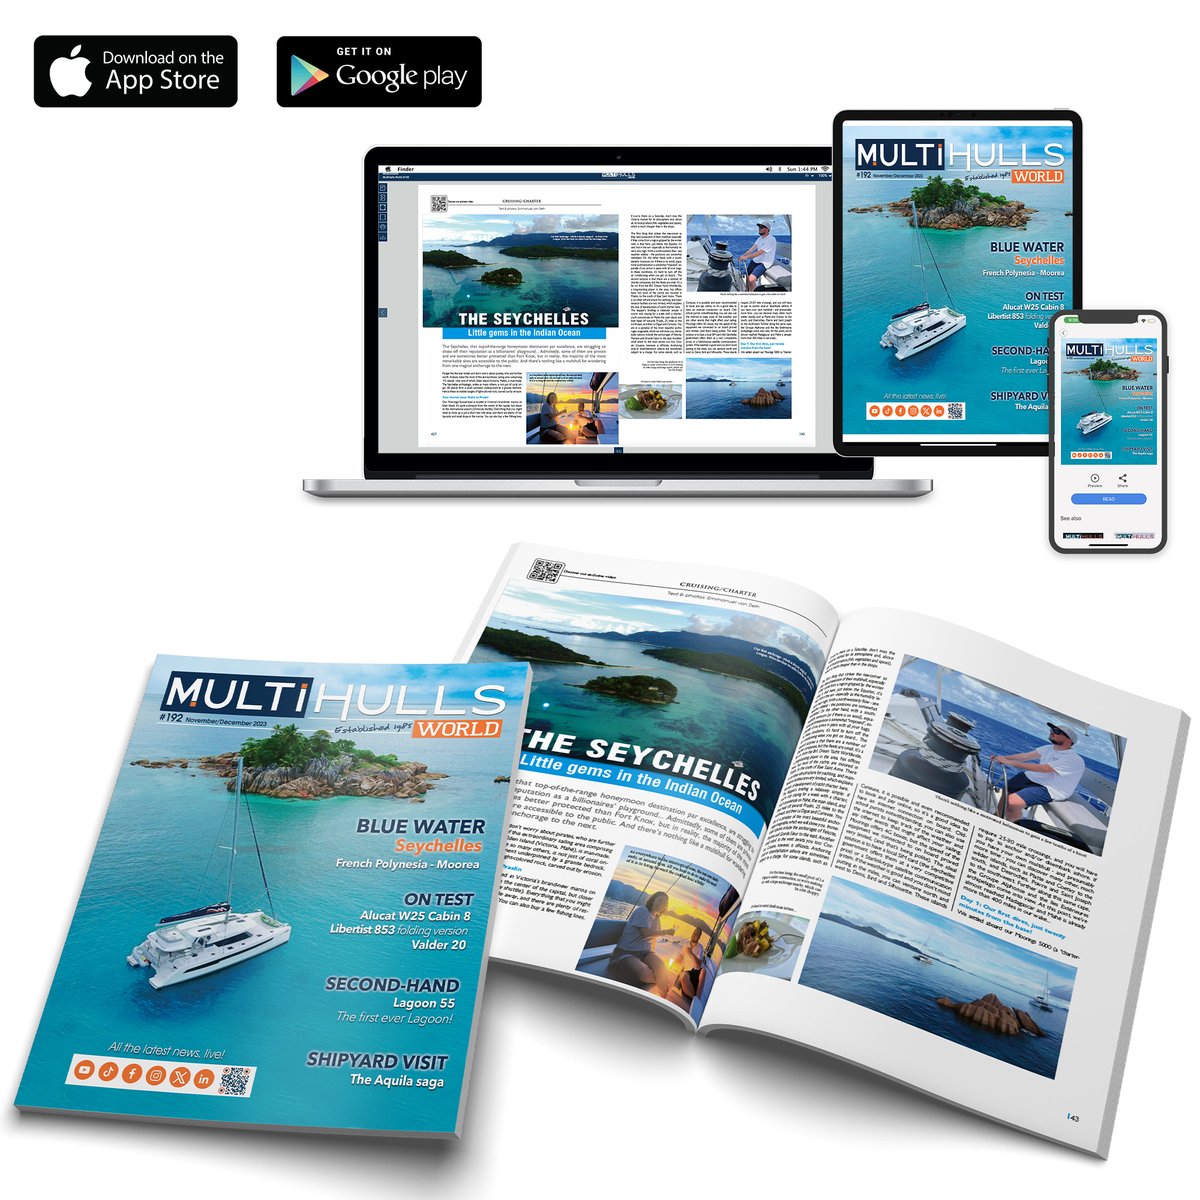 New Multihulls World #192 and Multicoques Mag n°221 are now available!   

English version ➡️ bit.ly/3EWNICy
French version ➡️ bit.ly/3PXEwnK